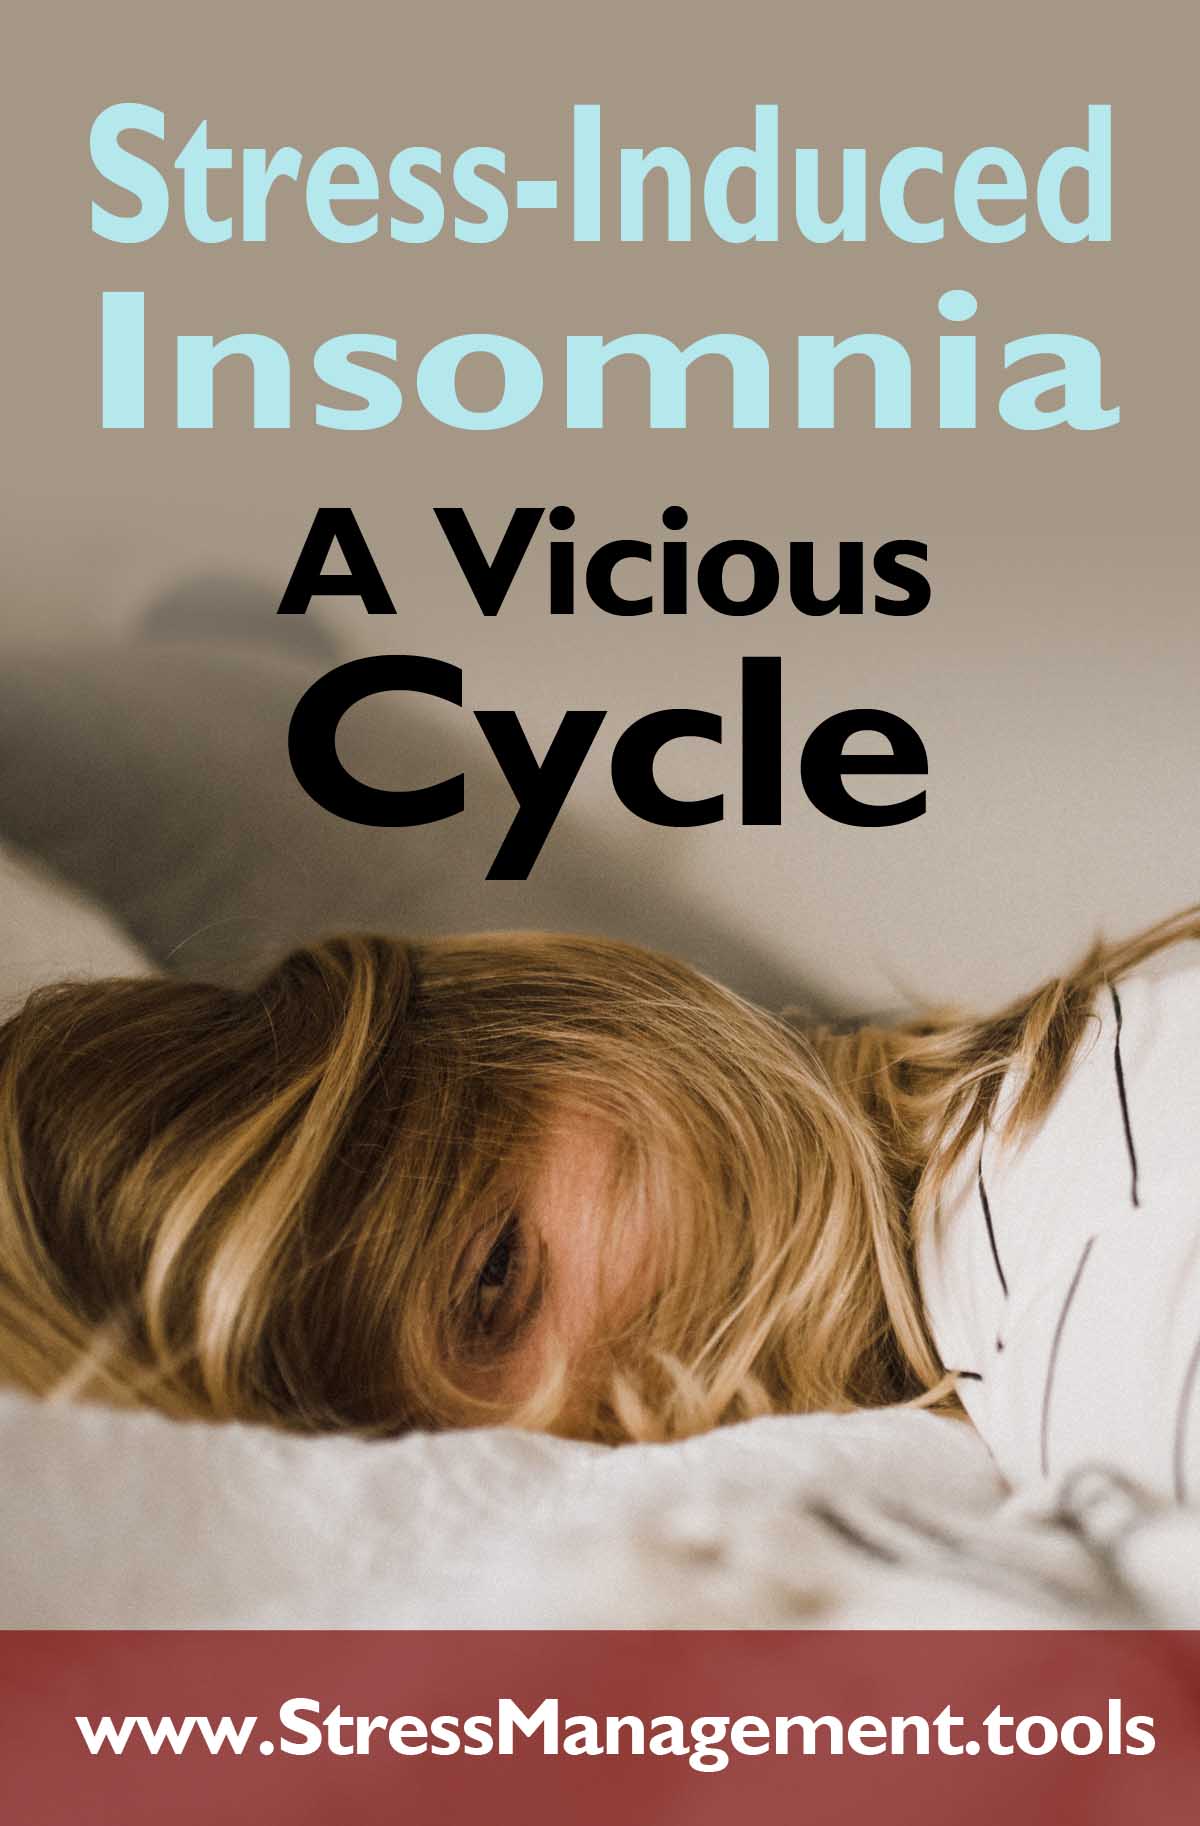 Stress-Induced Insomnia - A Vicious Cycle